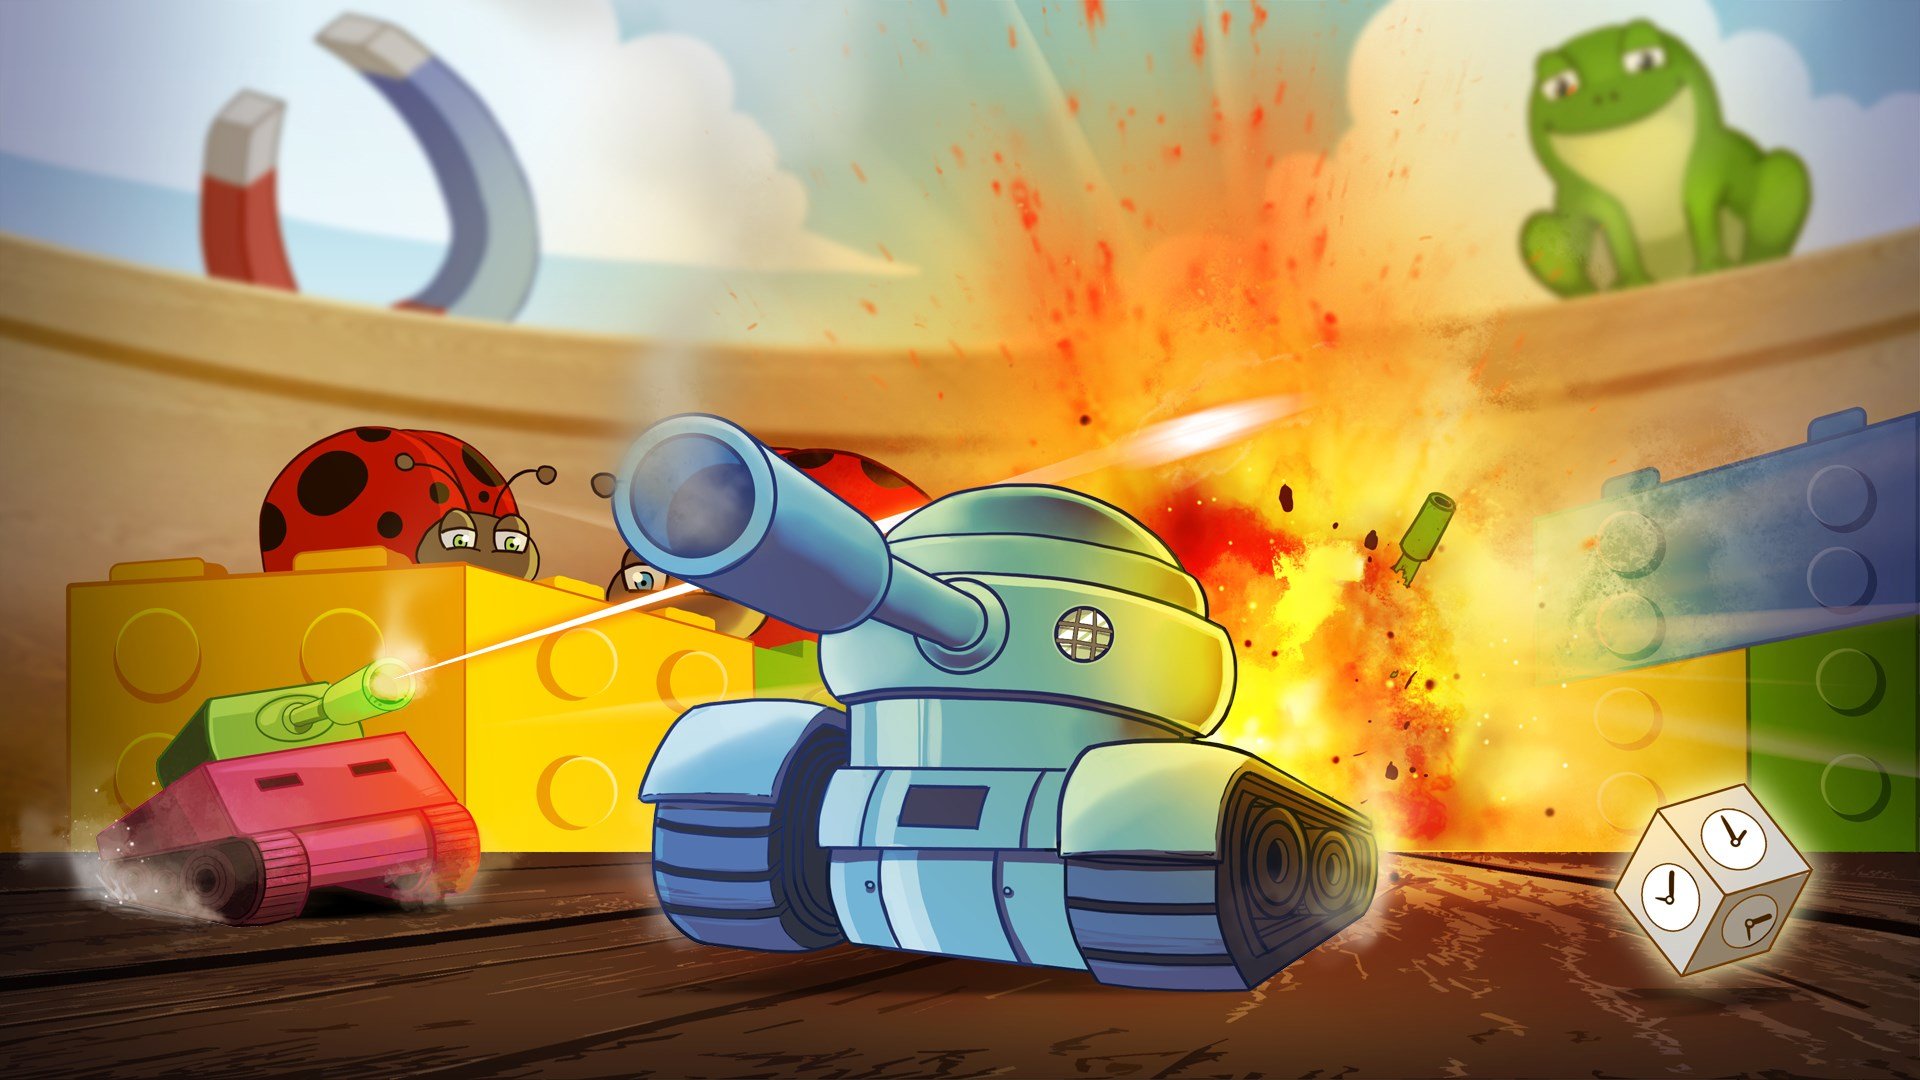 Attack of Toy Tanks cover image